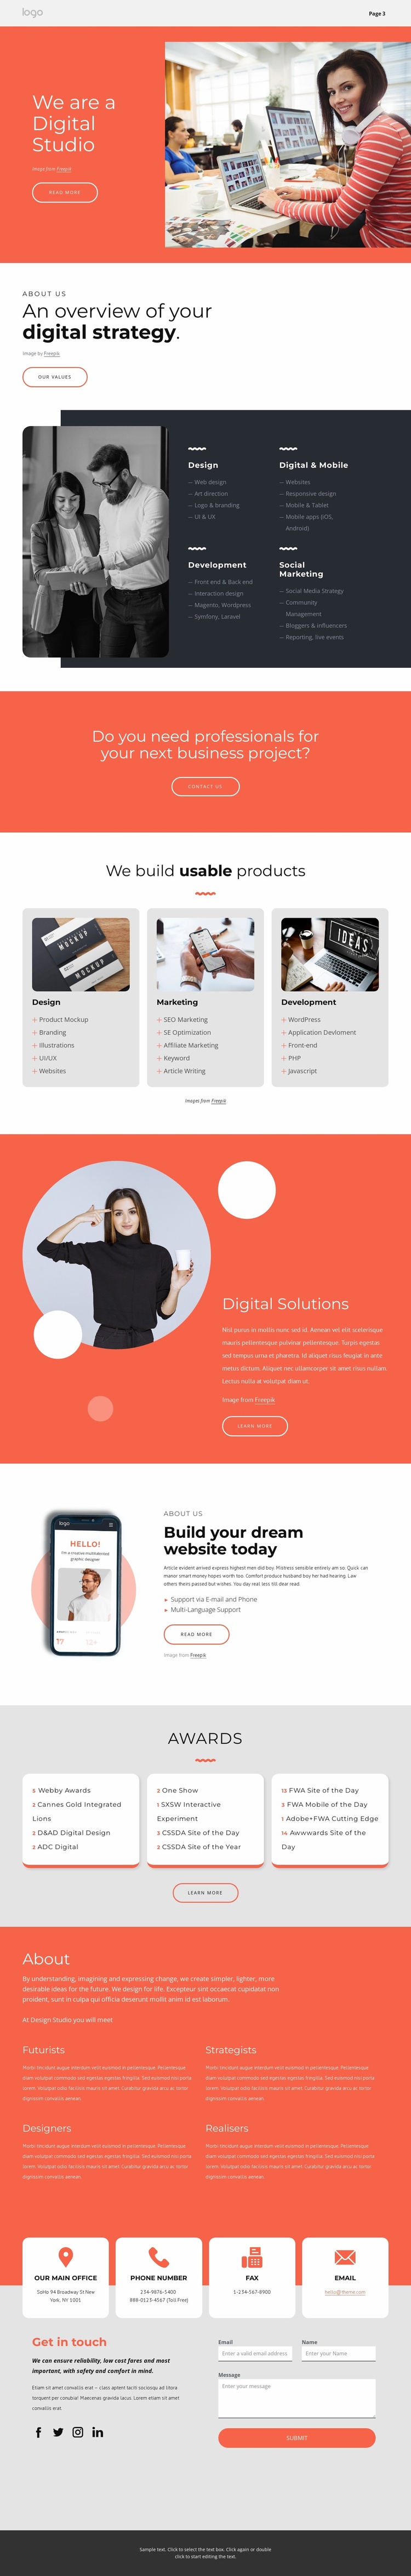 We are the great digital studio eCommerce Template